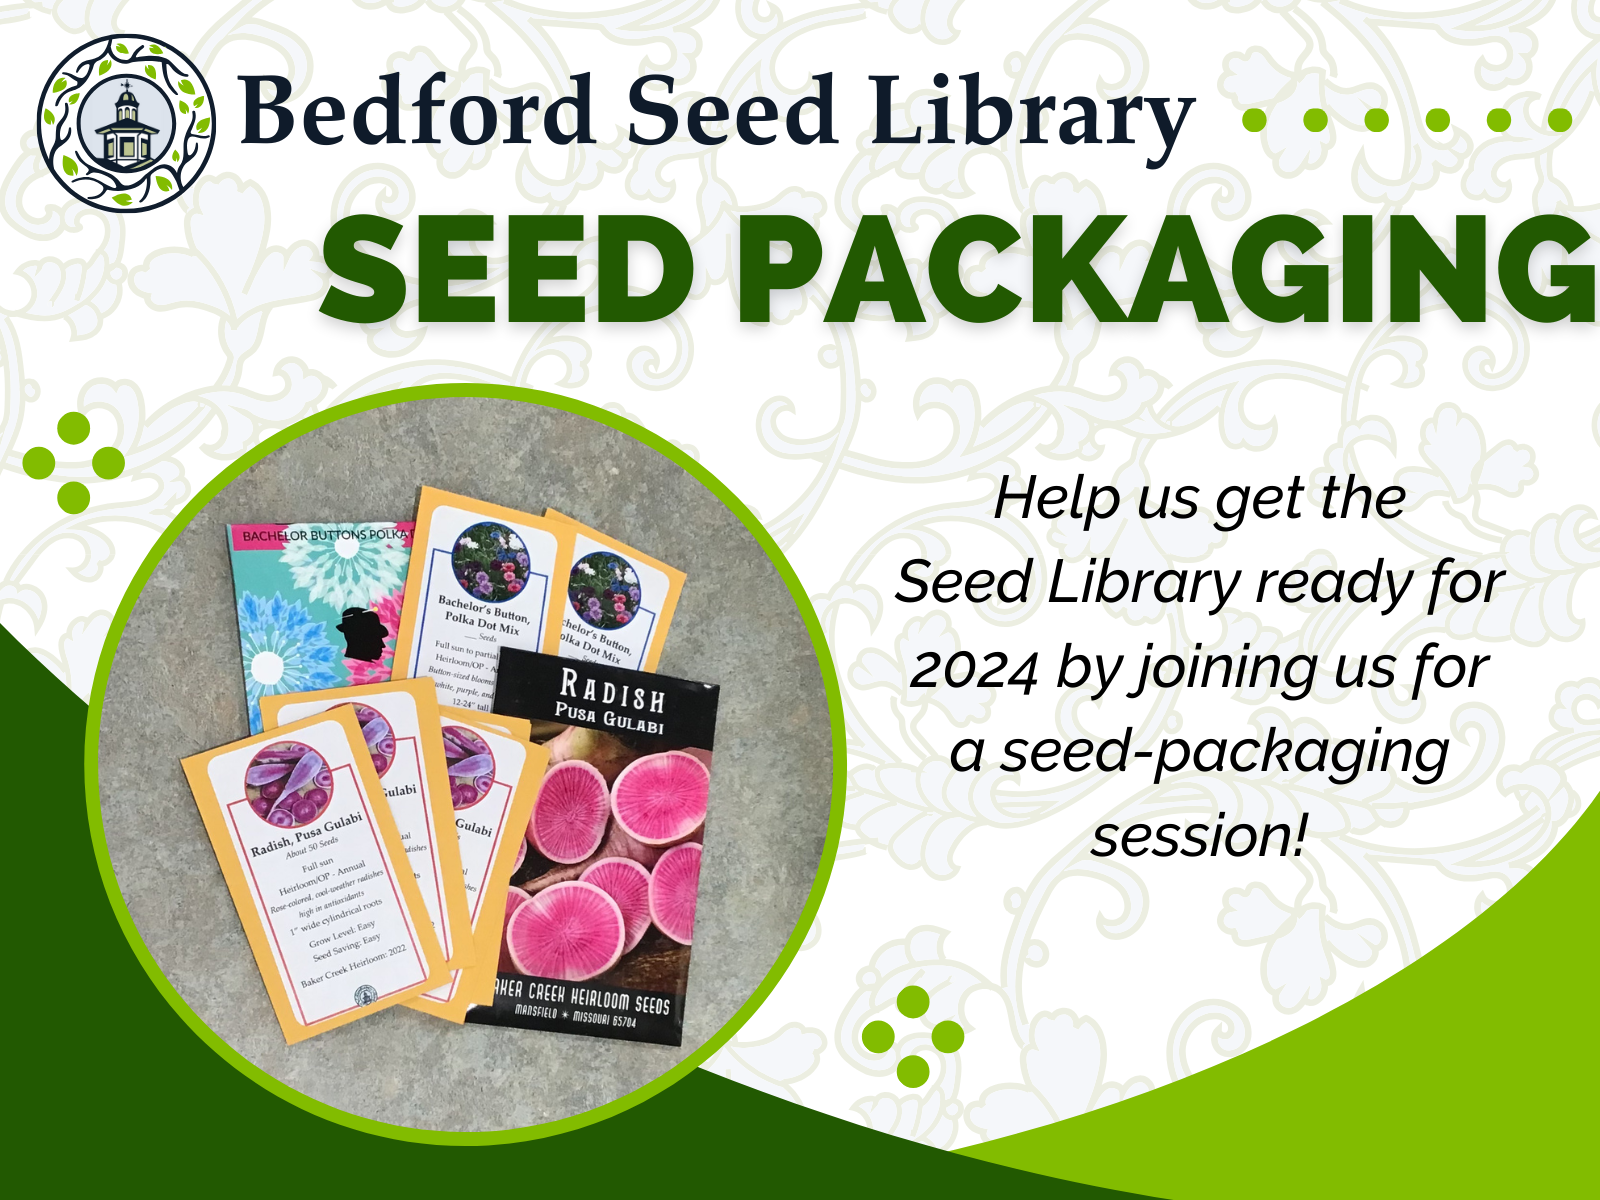 Join us for a seed packaging session to help get the seed library ready for the2024 growing season!